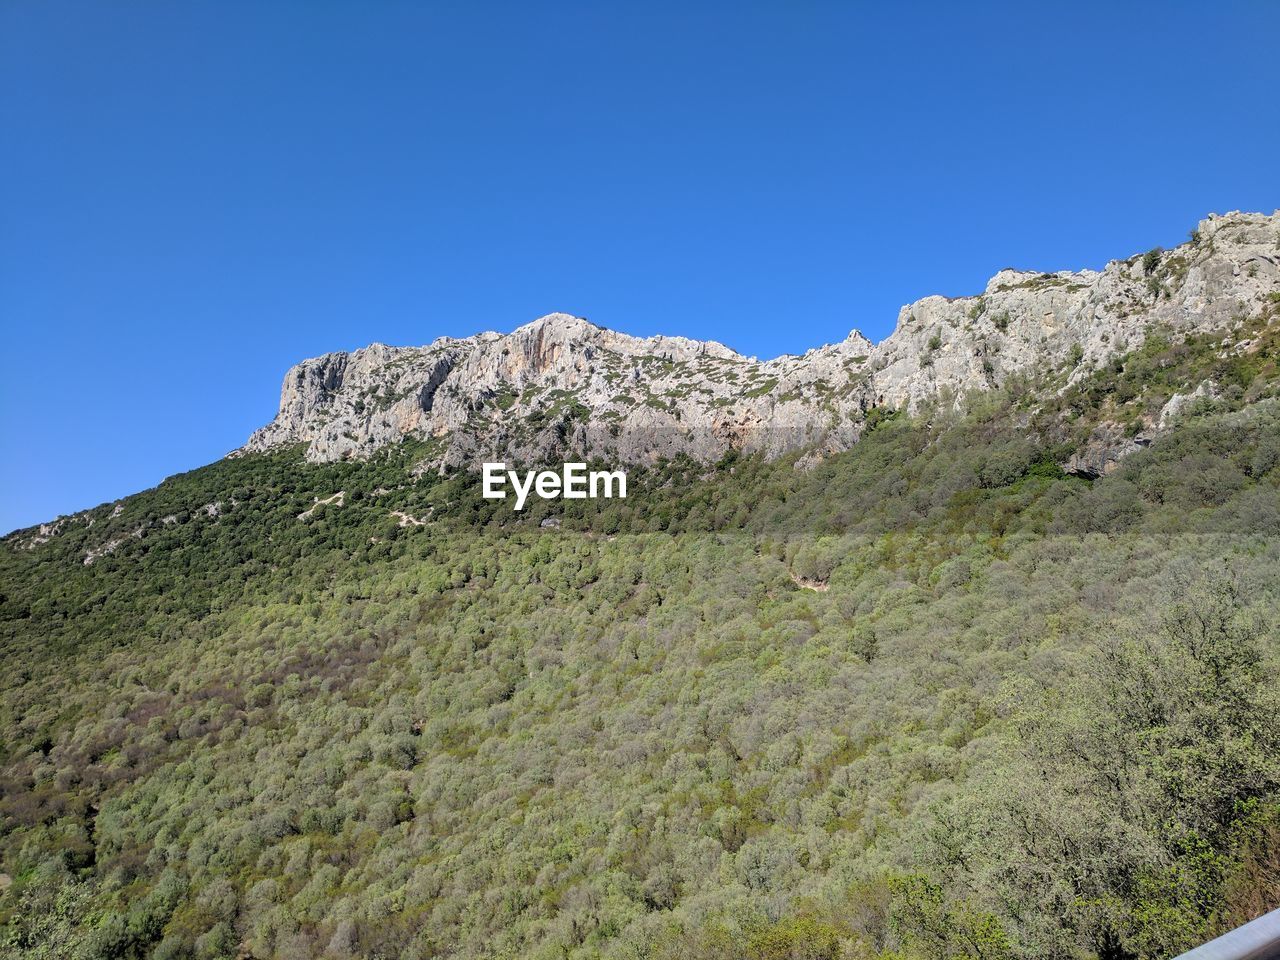 LOW ANGLE VIEW OF MOUNTAIN AGAINST BLUE SKY